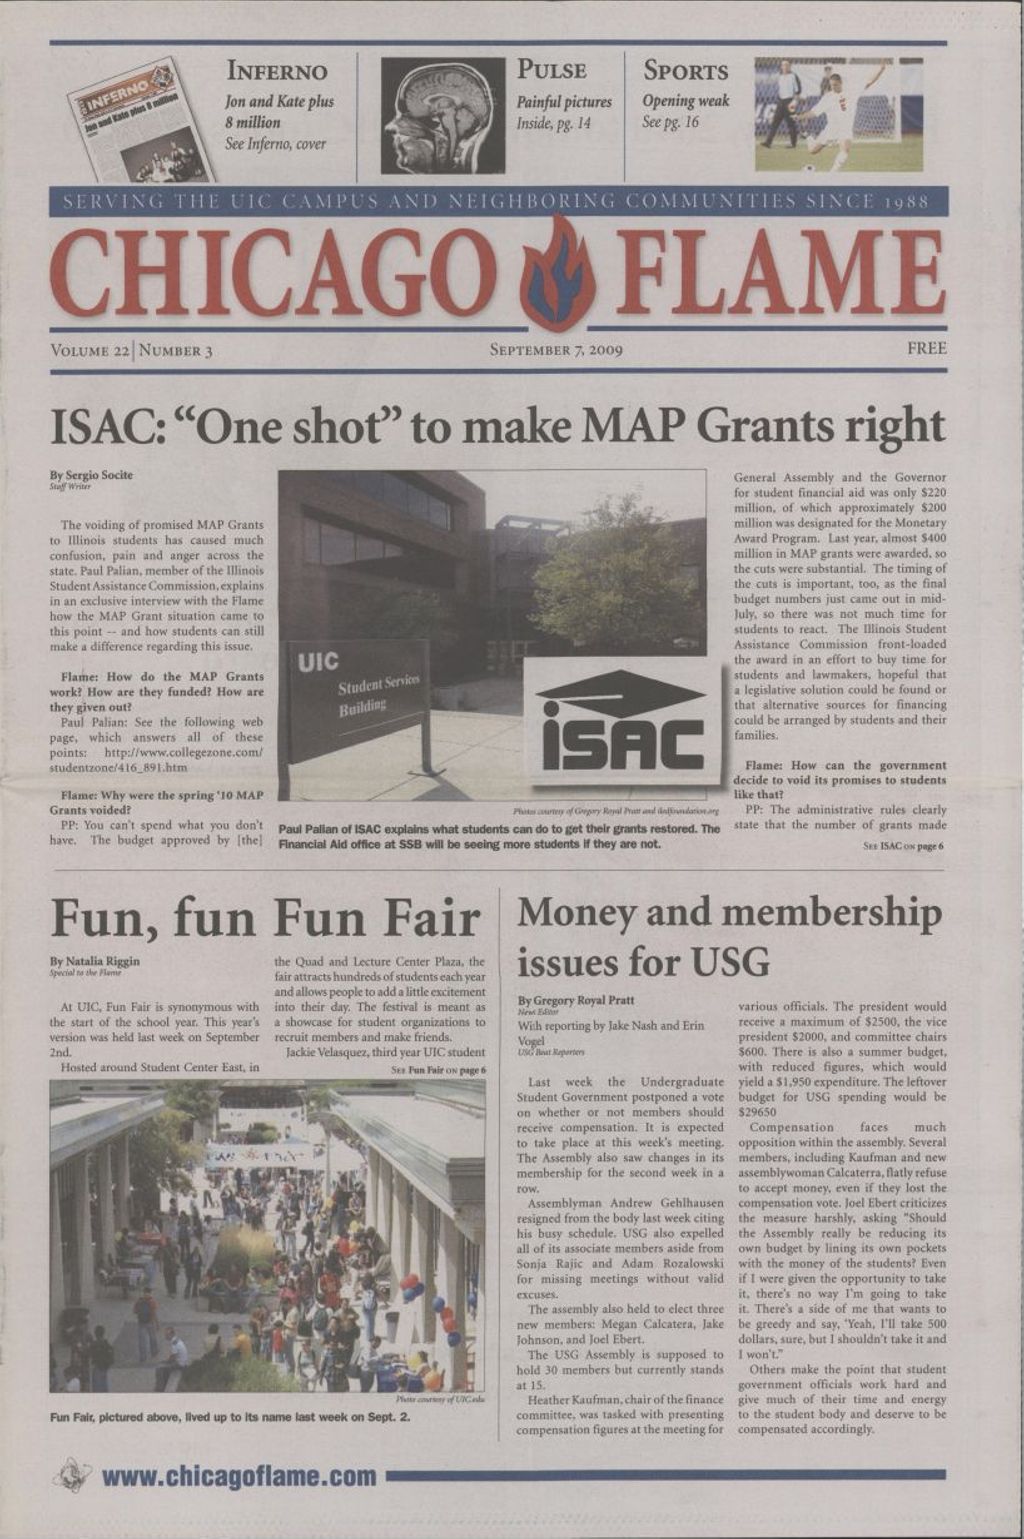 Miniature of Chicago Flame (September 7, 2009)